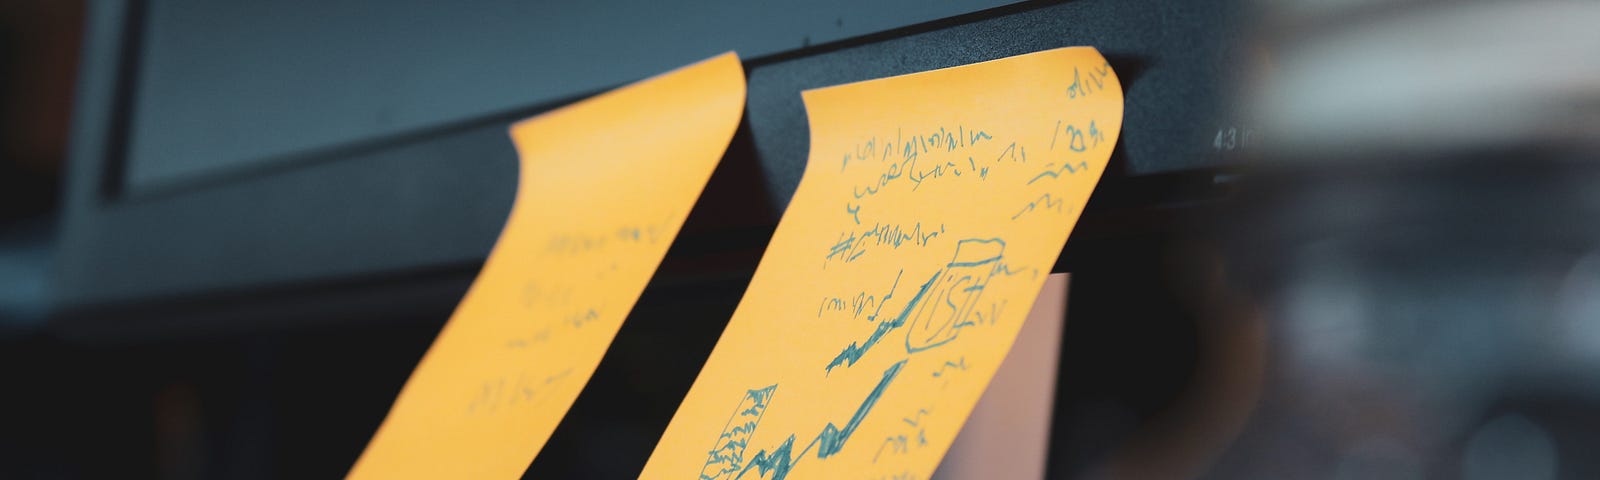 Two orange post-its with blue scribbling stuck to a computer screen.